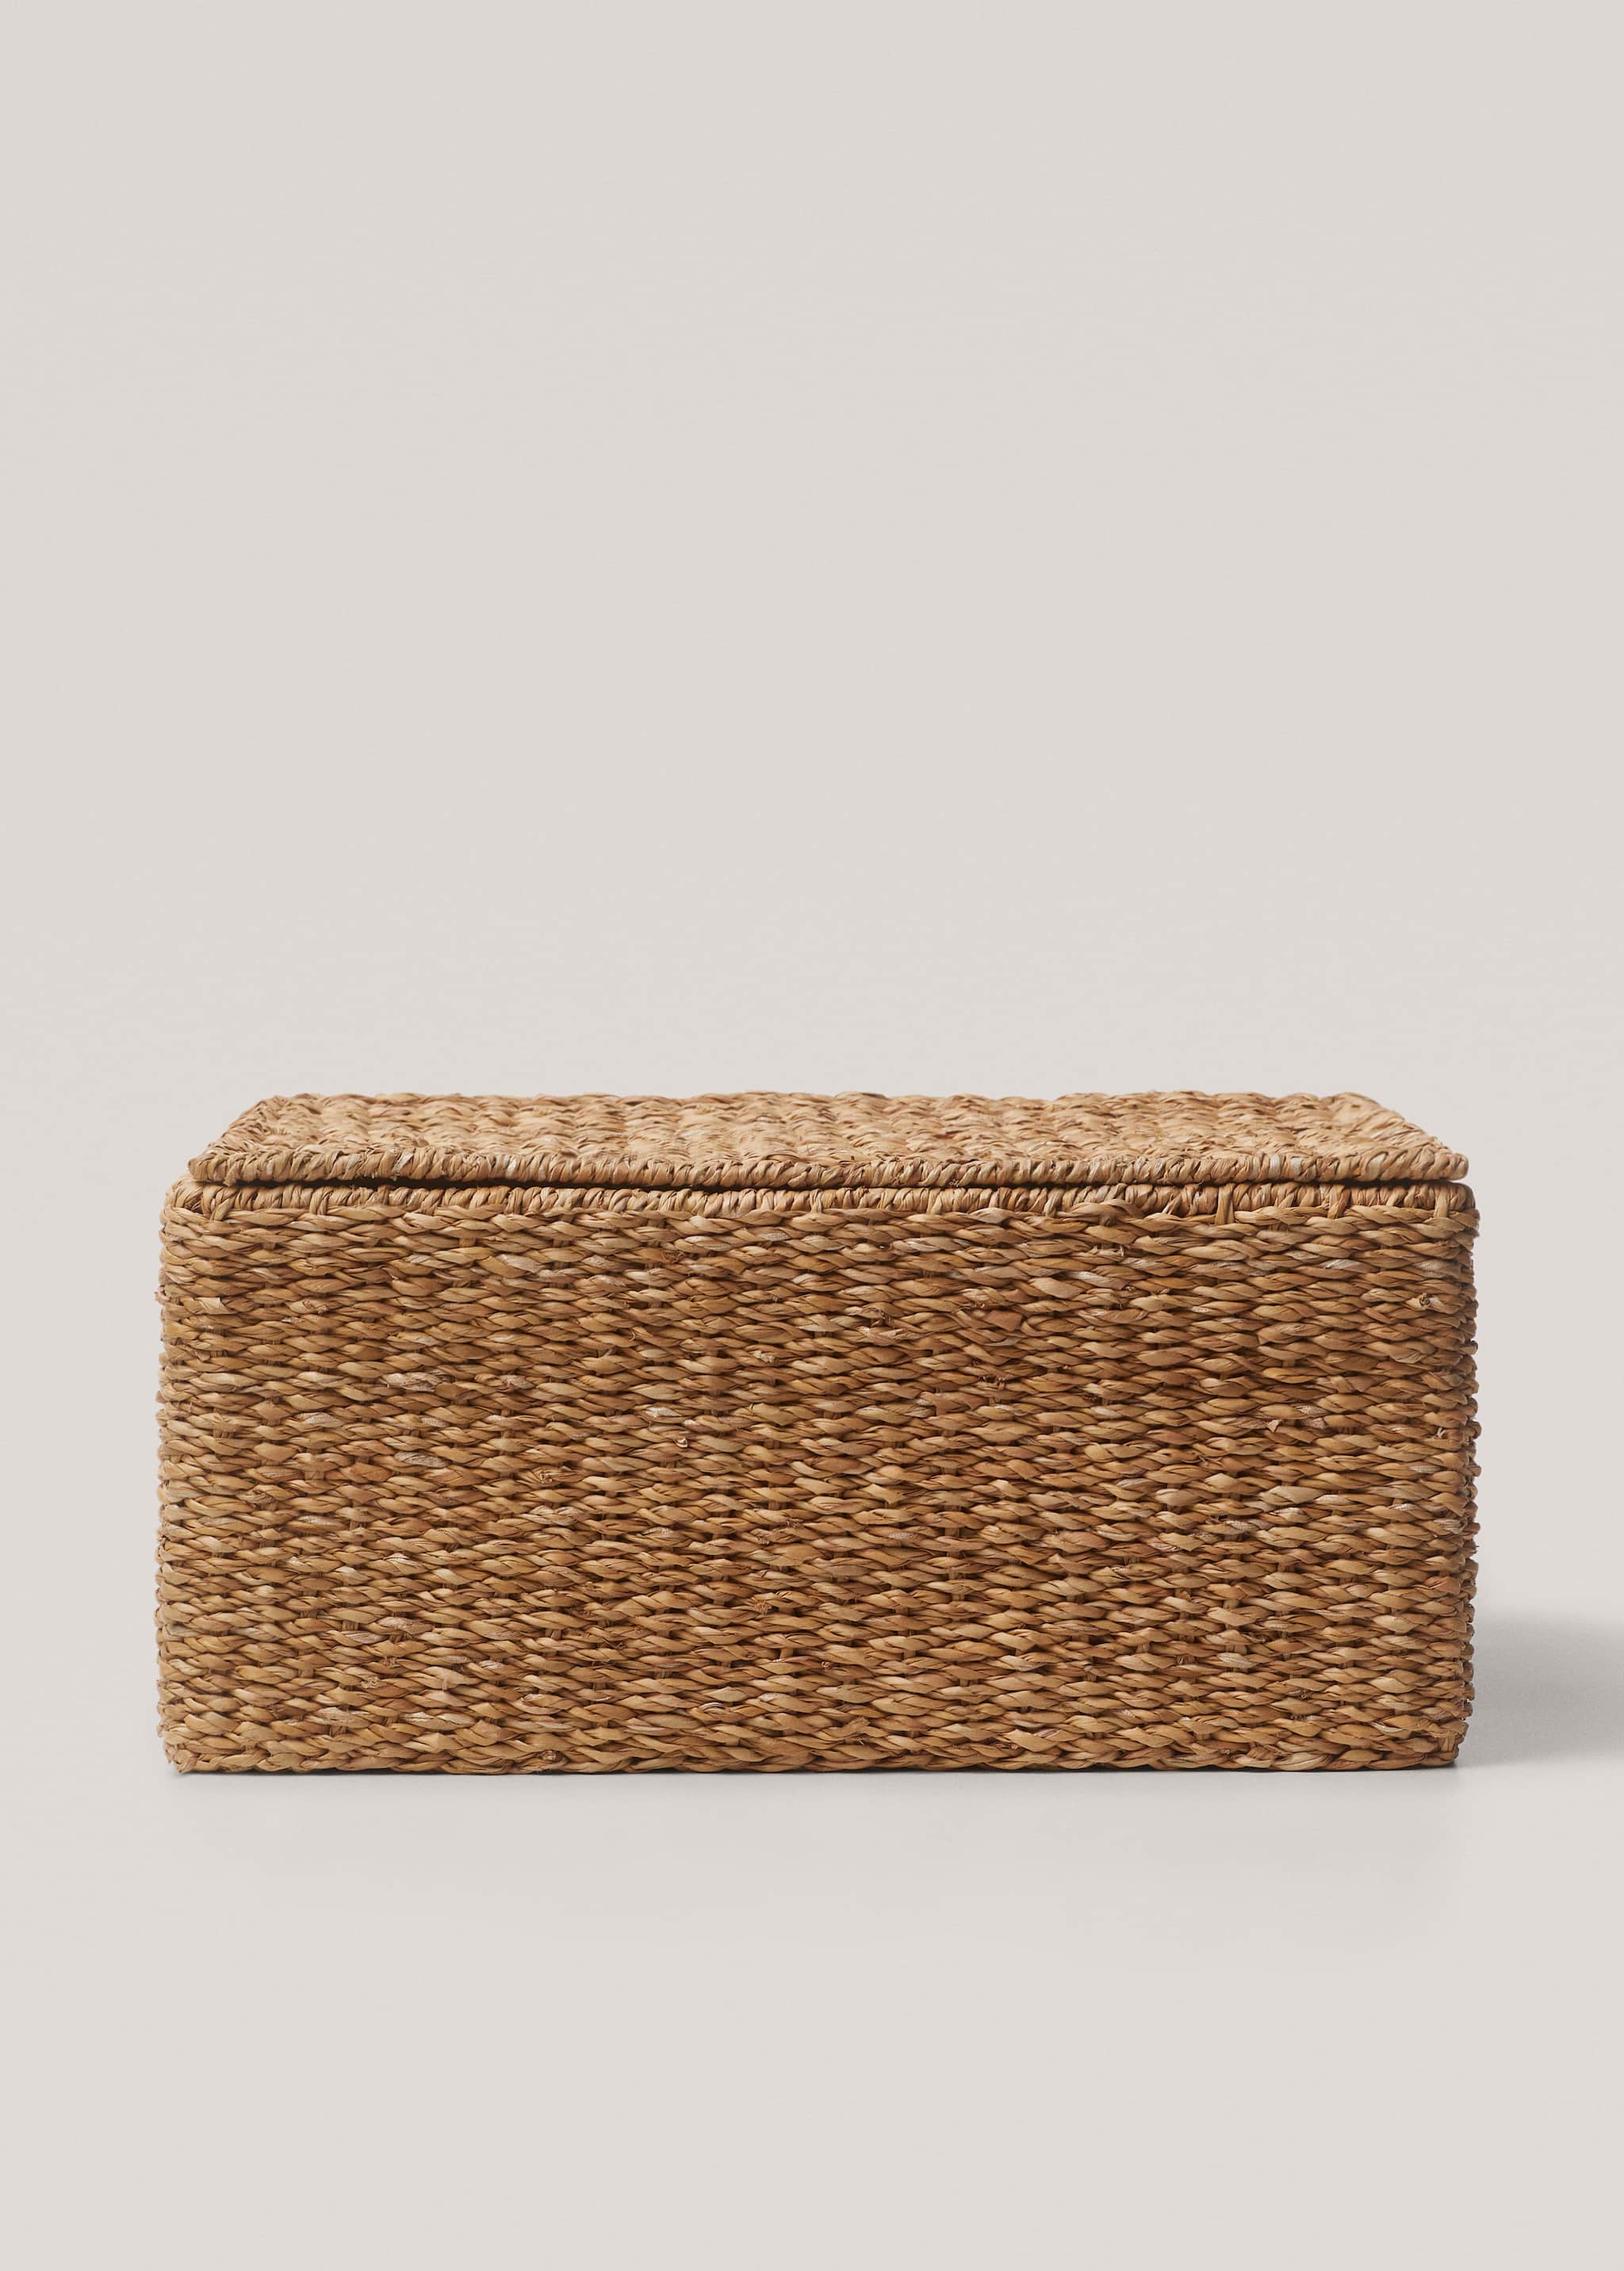 Braided basket with handles 45x35cm - Article without model